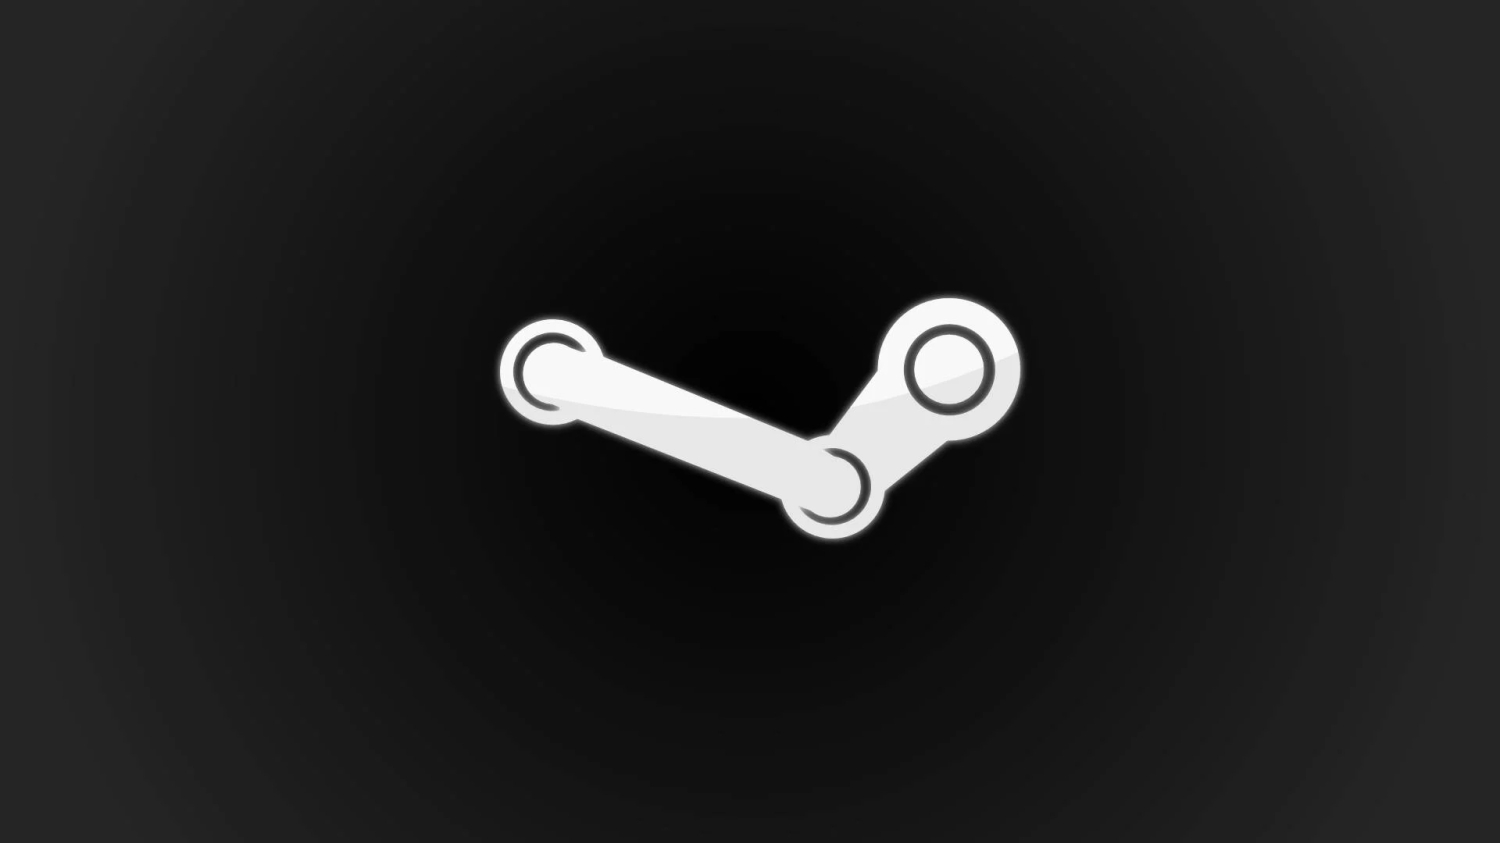 Valve seems to be taking action against the Steam Workshop downloader :  r/pcgaming